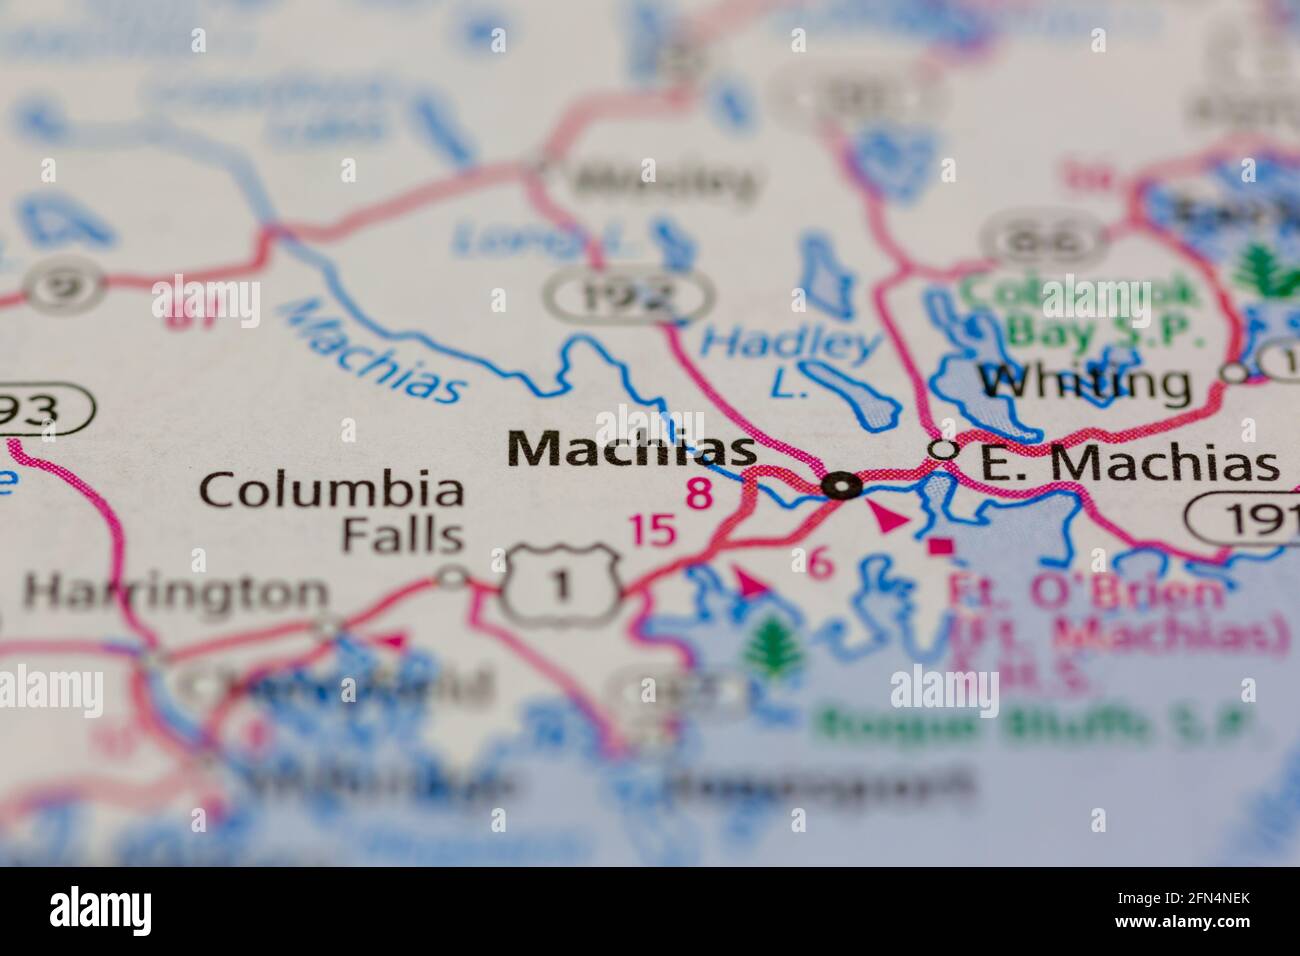 Machias Maine USA shown on a Geography map or road map Stock Photo